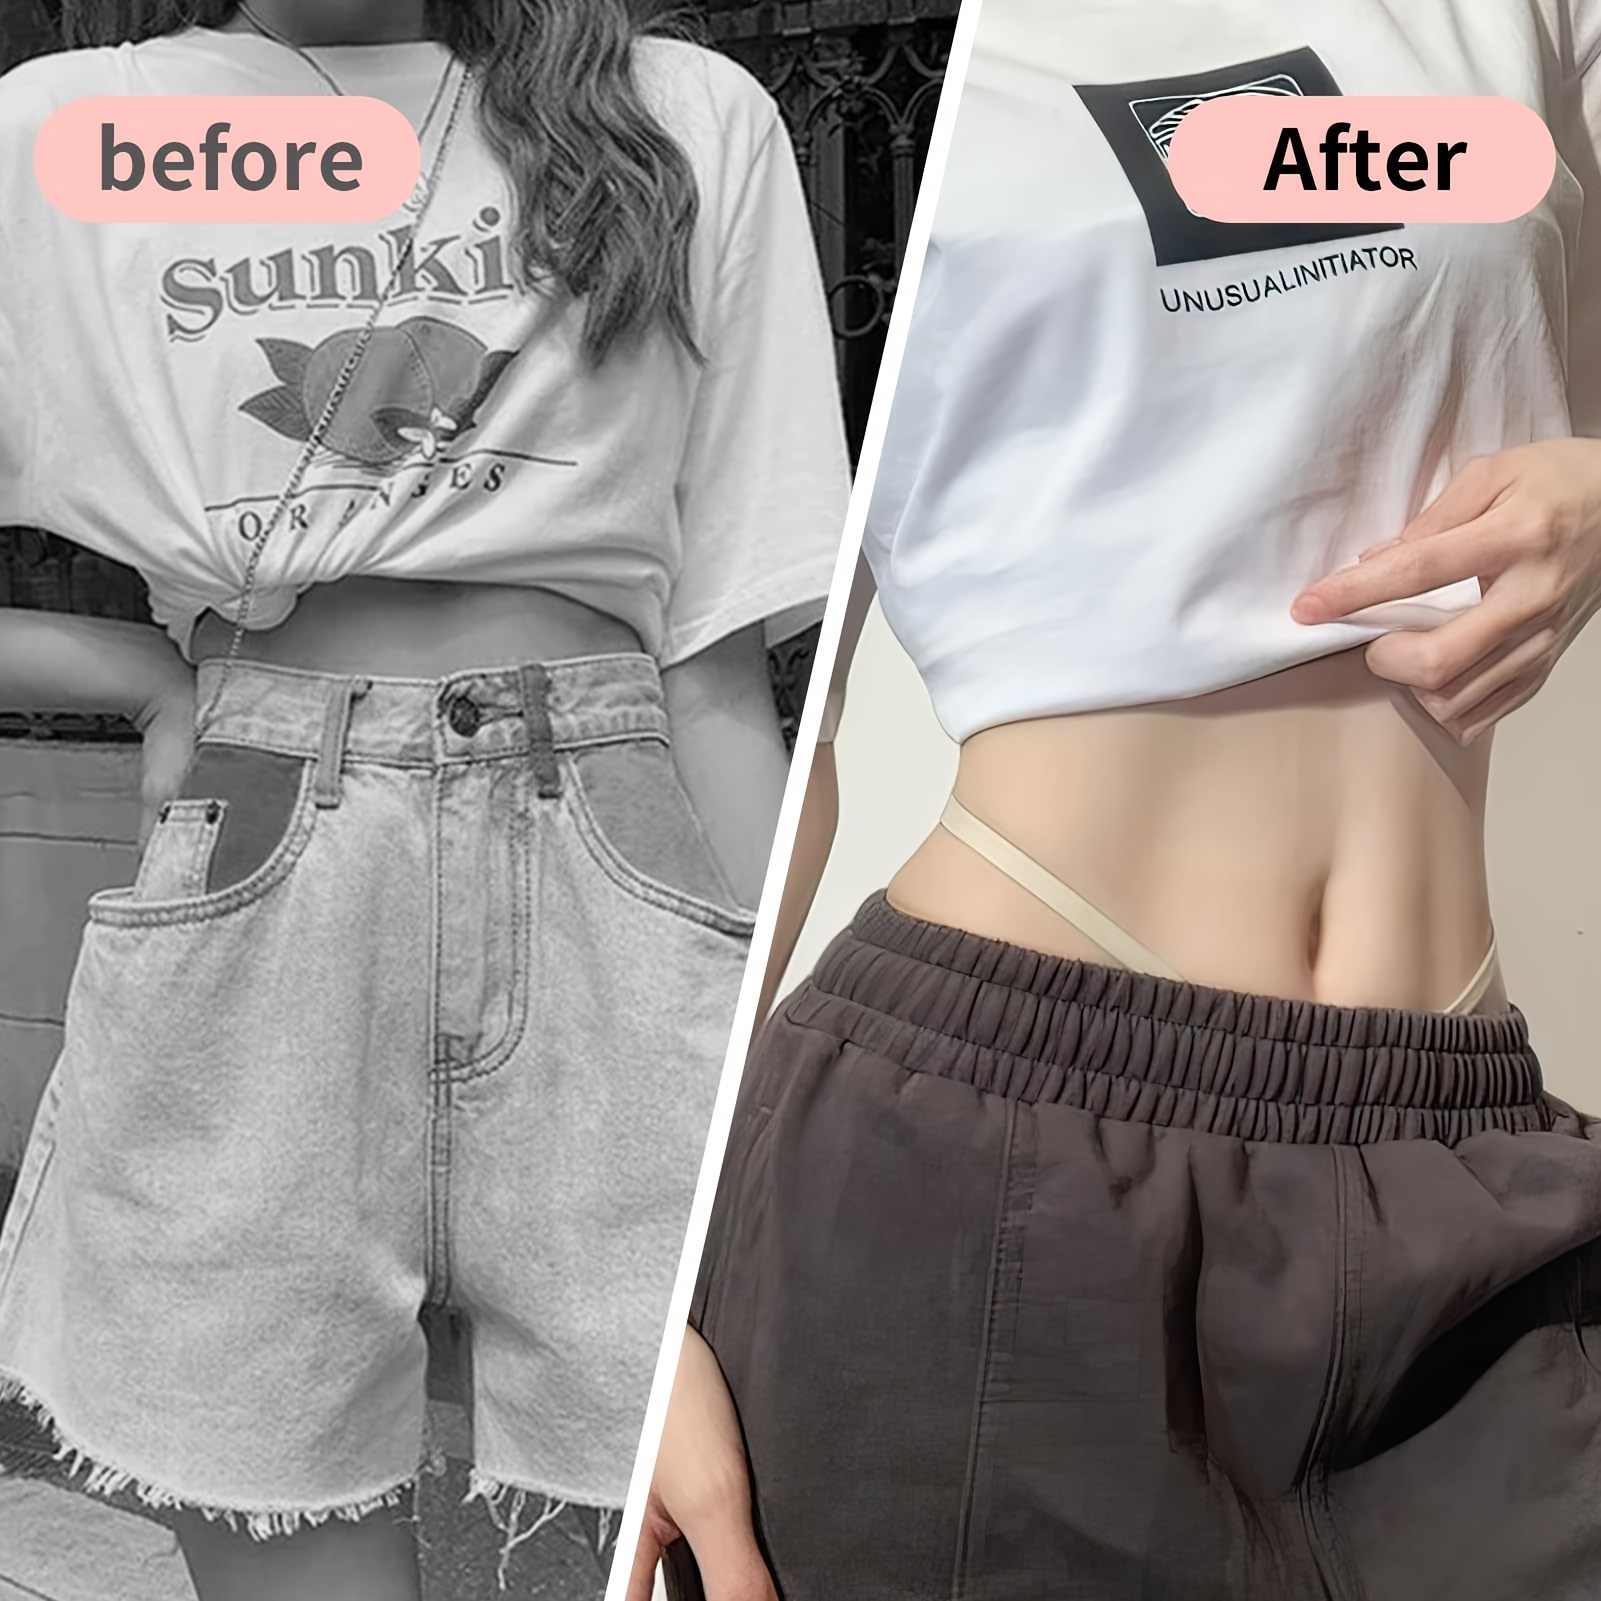 Crop Tuck Adjustable Band for Shirts, 4 Sizes Croptuck Adjustable Band,  Crop Tuck Belt for Shirt